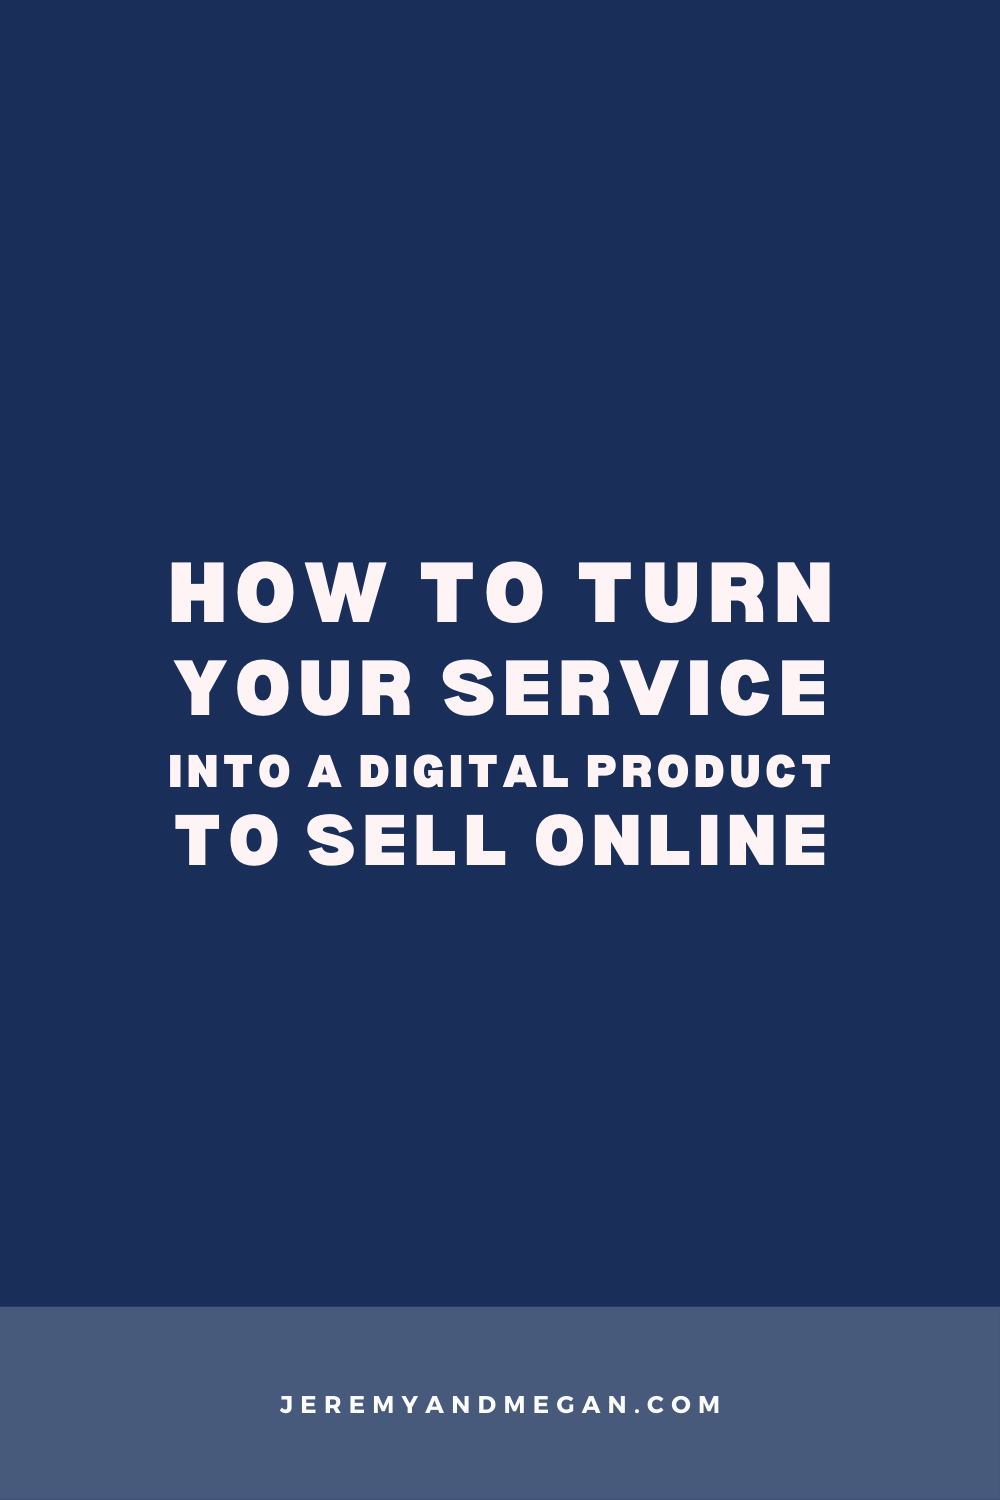 How to Turn Your Service into a Digital Product to Sell Online: two tips from digital product creator + educator Megan Martin